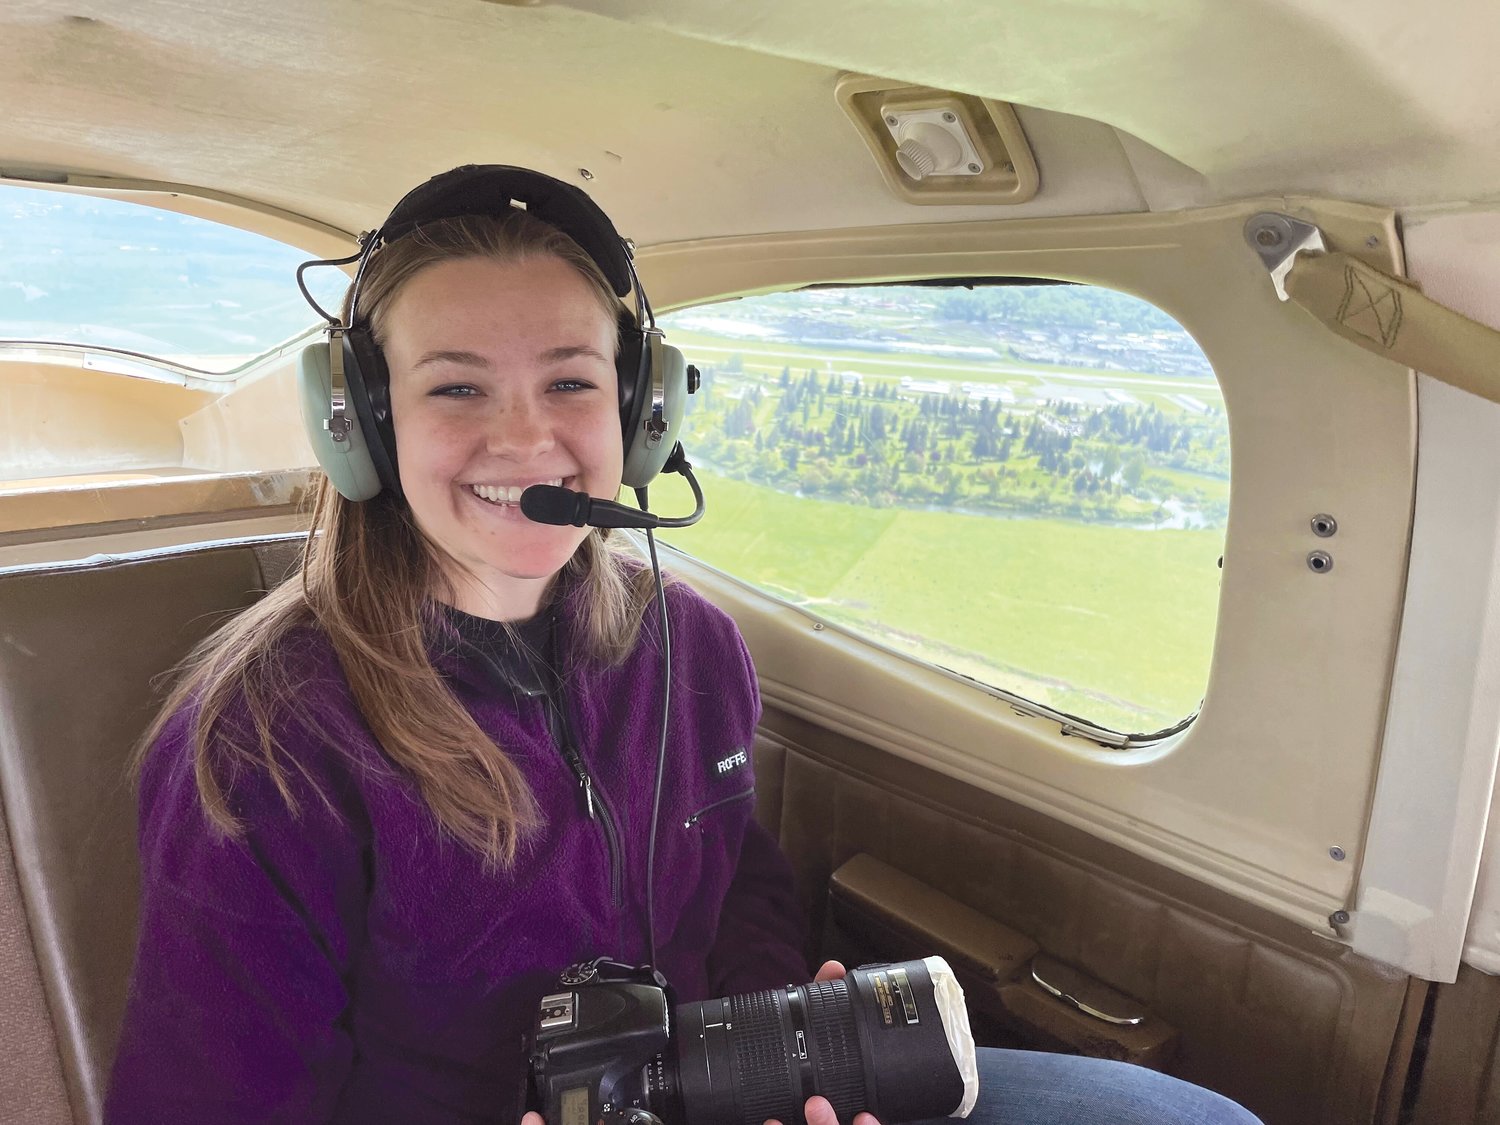 Chronicle reporter Isabel Vander Stoep, pictured here, and photographer Jared Wenzelburger flew above the Chehalis River Basin Friday morning for some final photographs from the air before embarking on a 10-day trip down the Chehalis River Saturday.